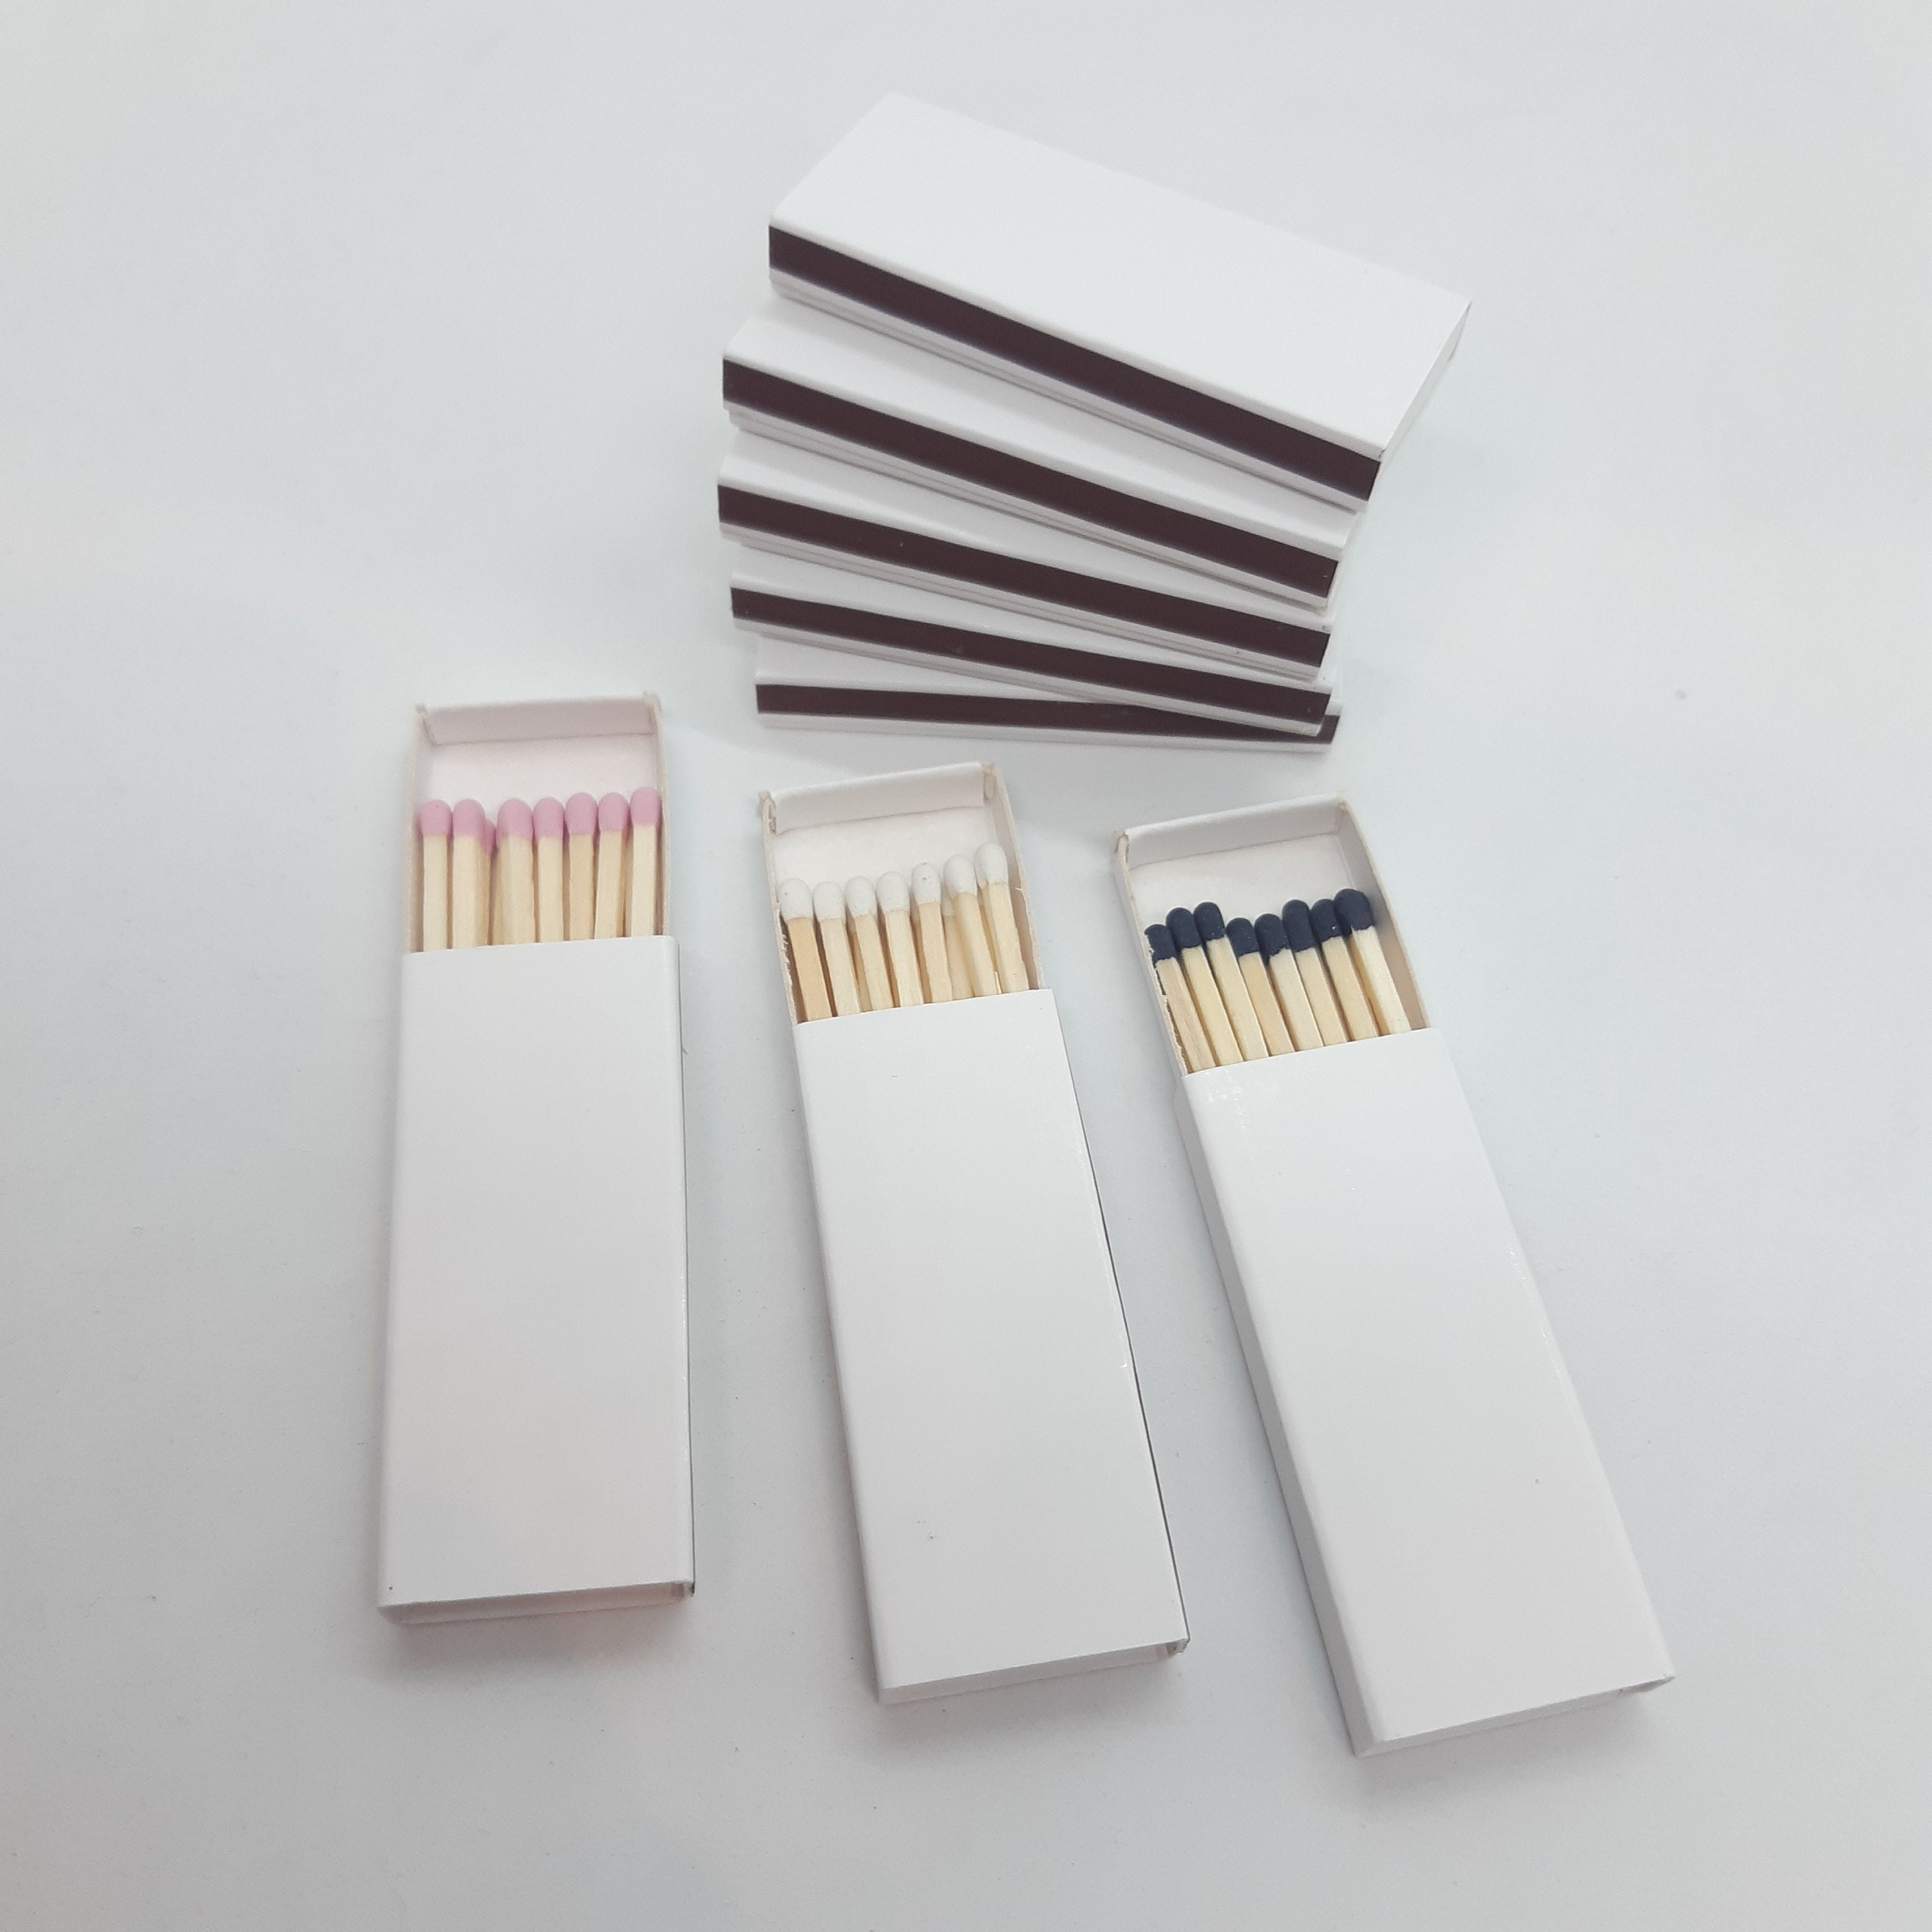 Matches - Box Colored Paper – BSEID